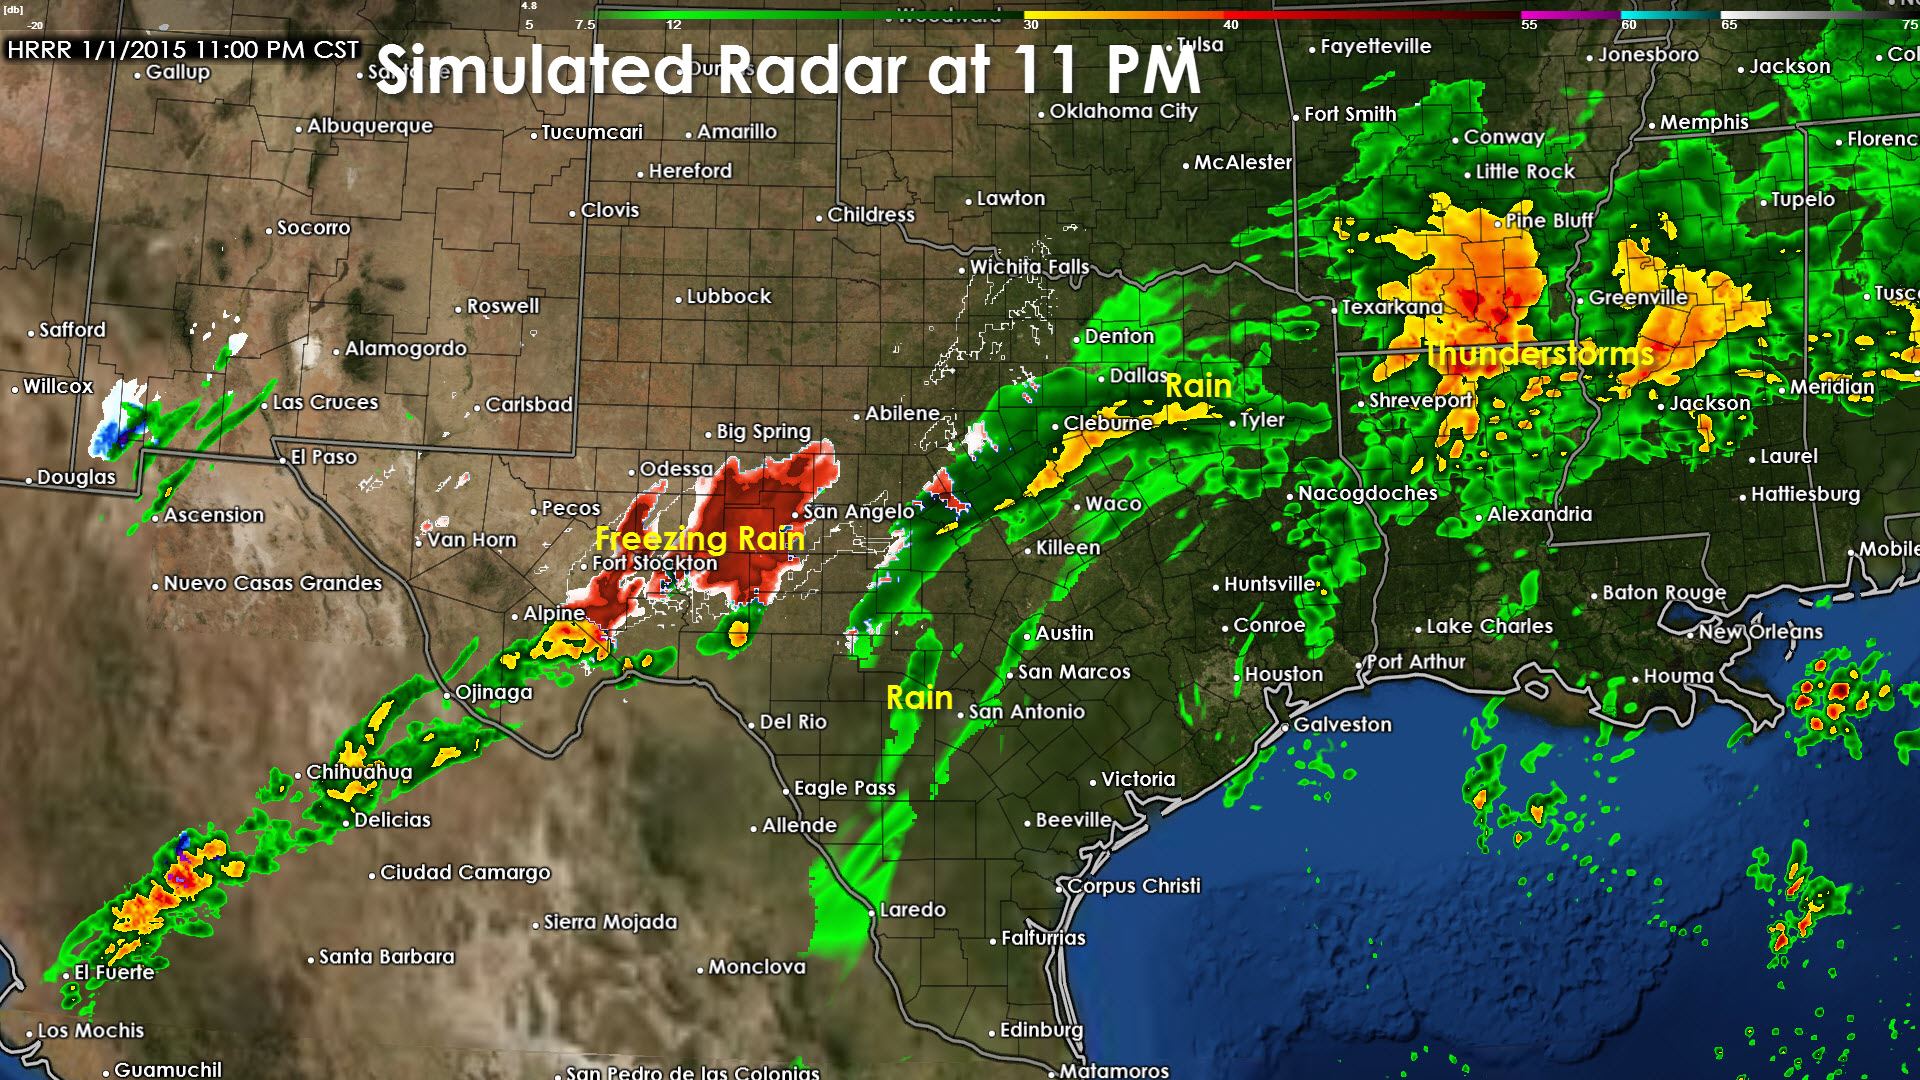 7 Pm Texas Weather Update Texas Storm Chasers